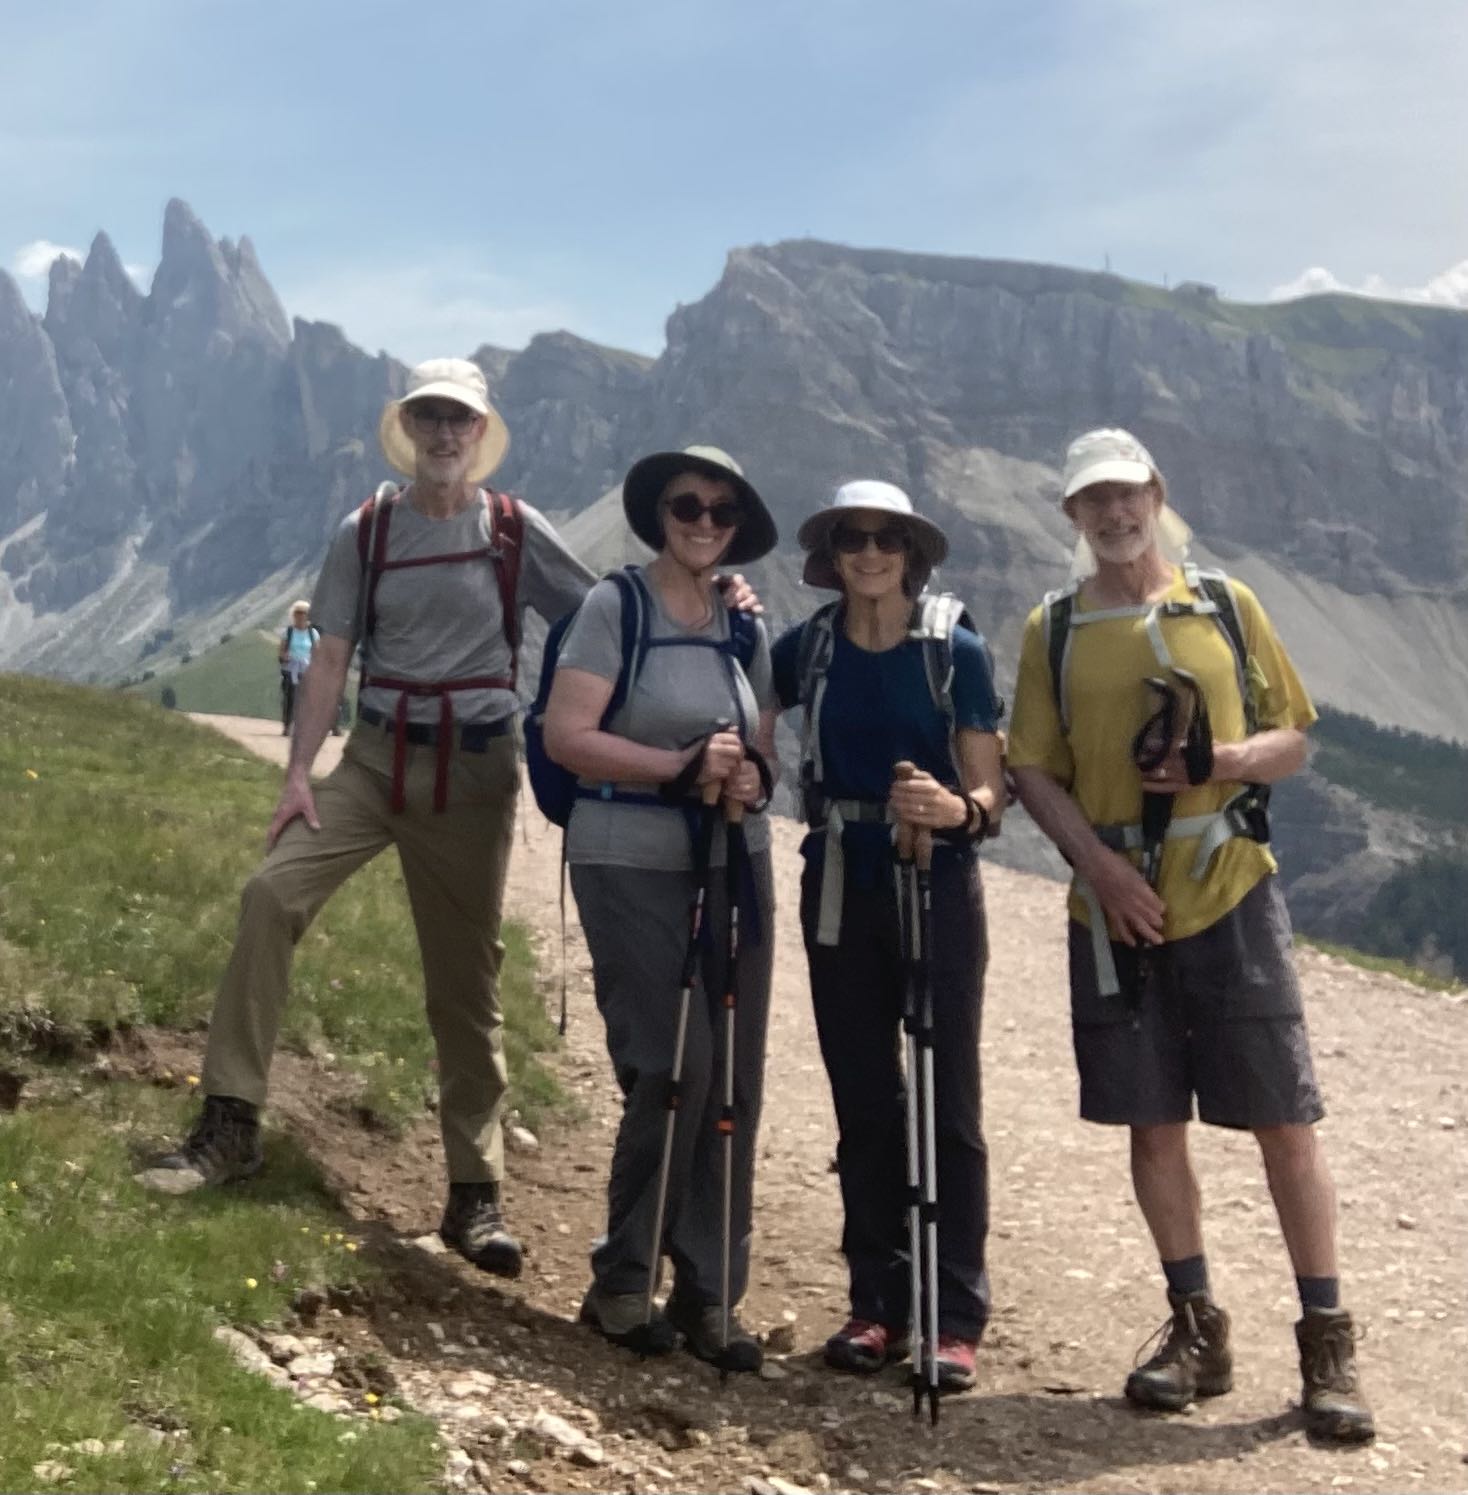 A Travel Story: When Your Back Bails on a Hike